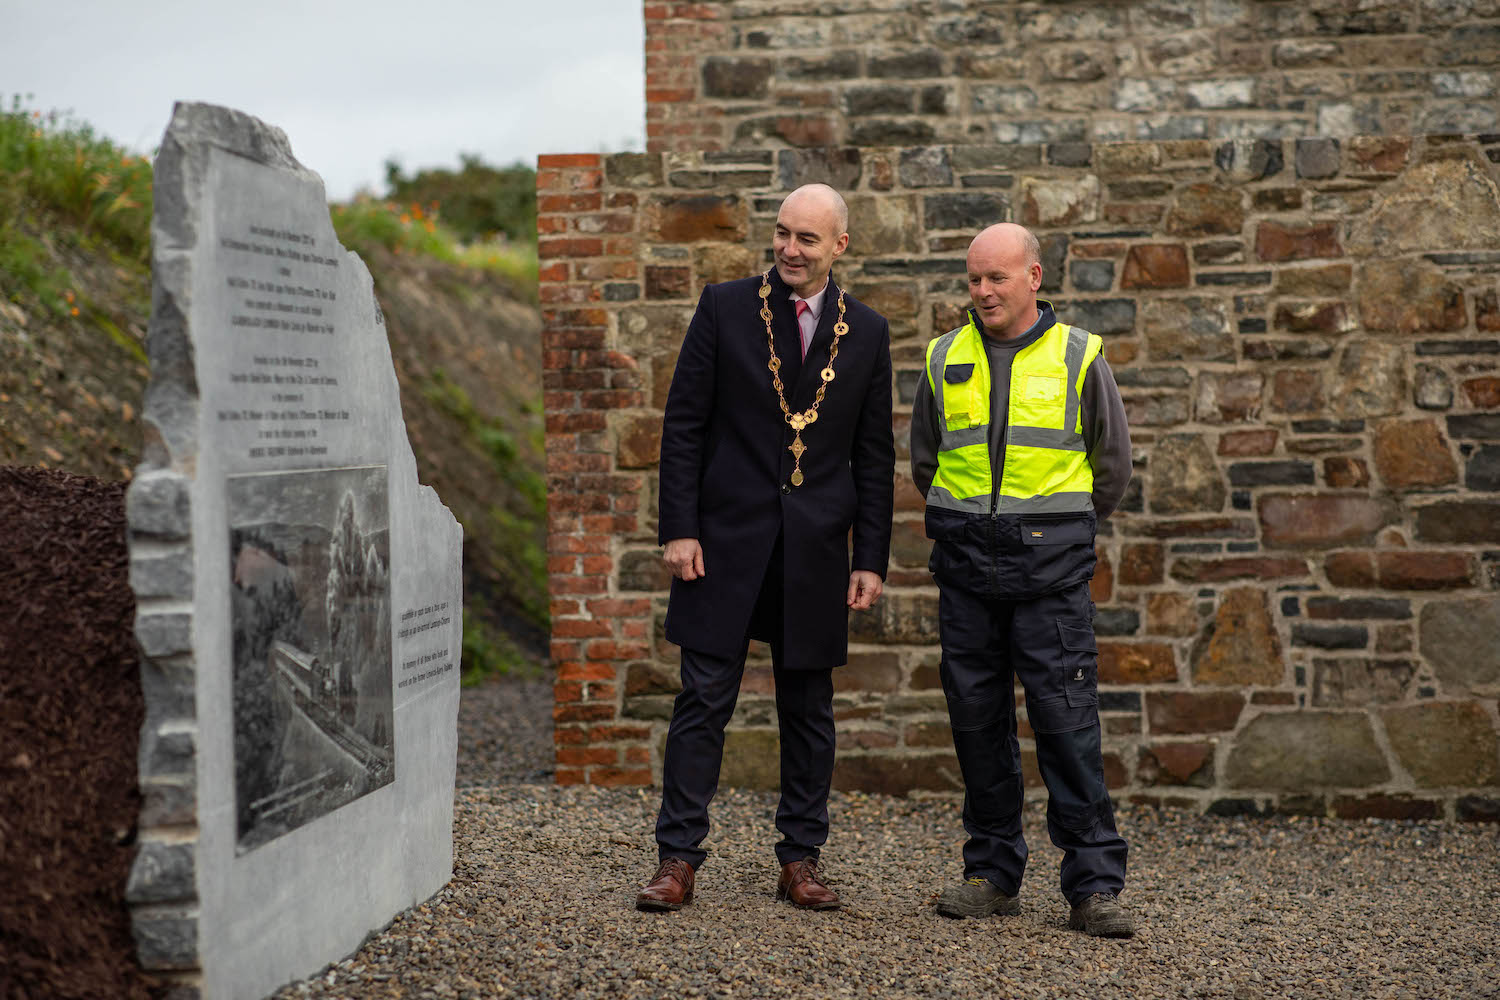 Limerick Greenway since opening - Pictured at the launch are from left: Daniel Butler, Mayor of the City and County of Limerick and John Guina, Limerick Greenway staff. Picture: Sean Curtin/True Media